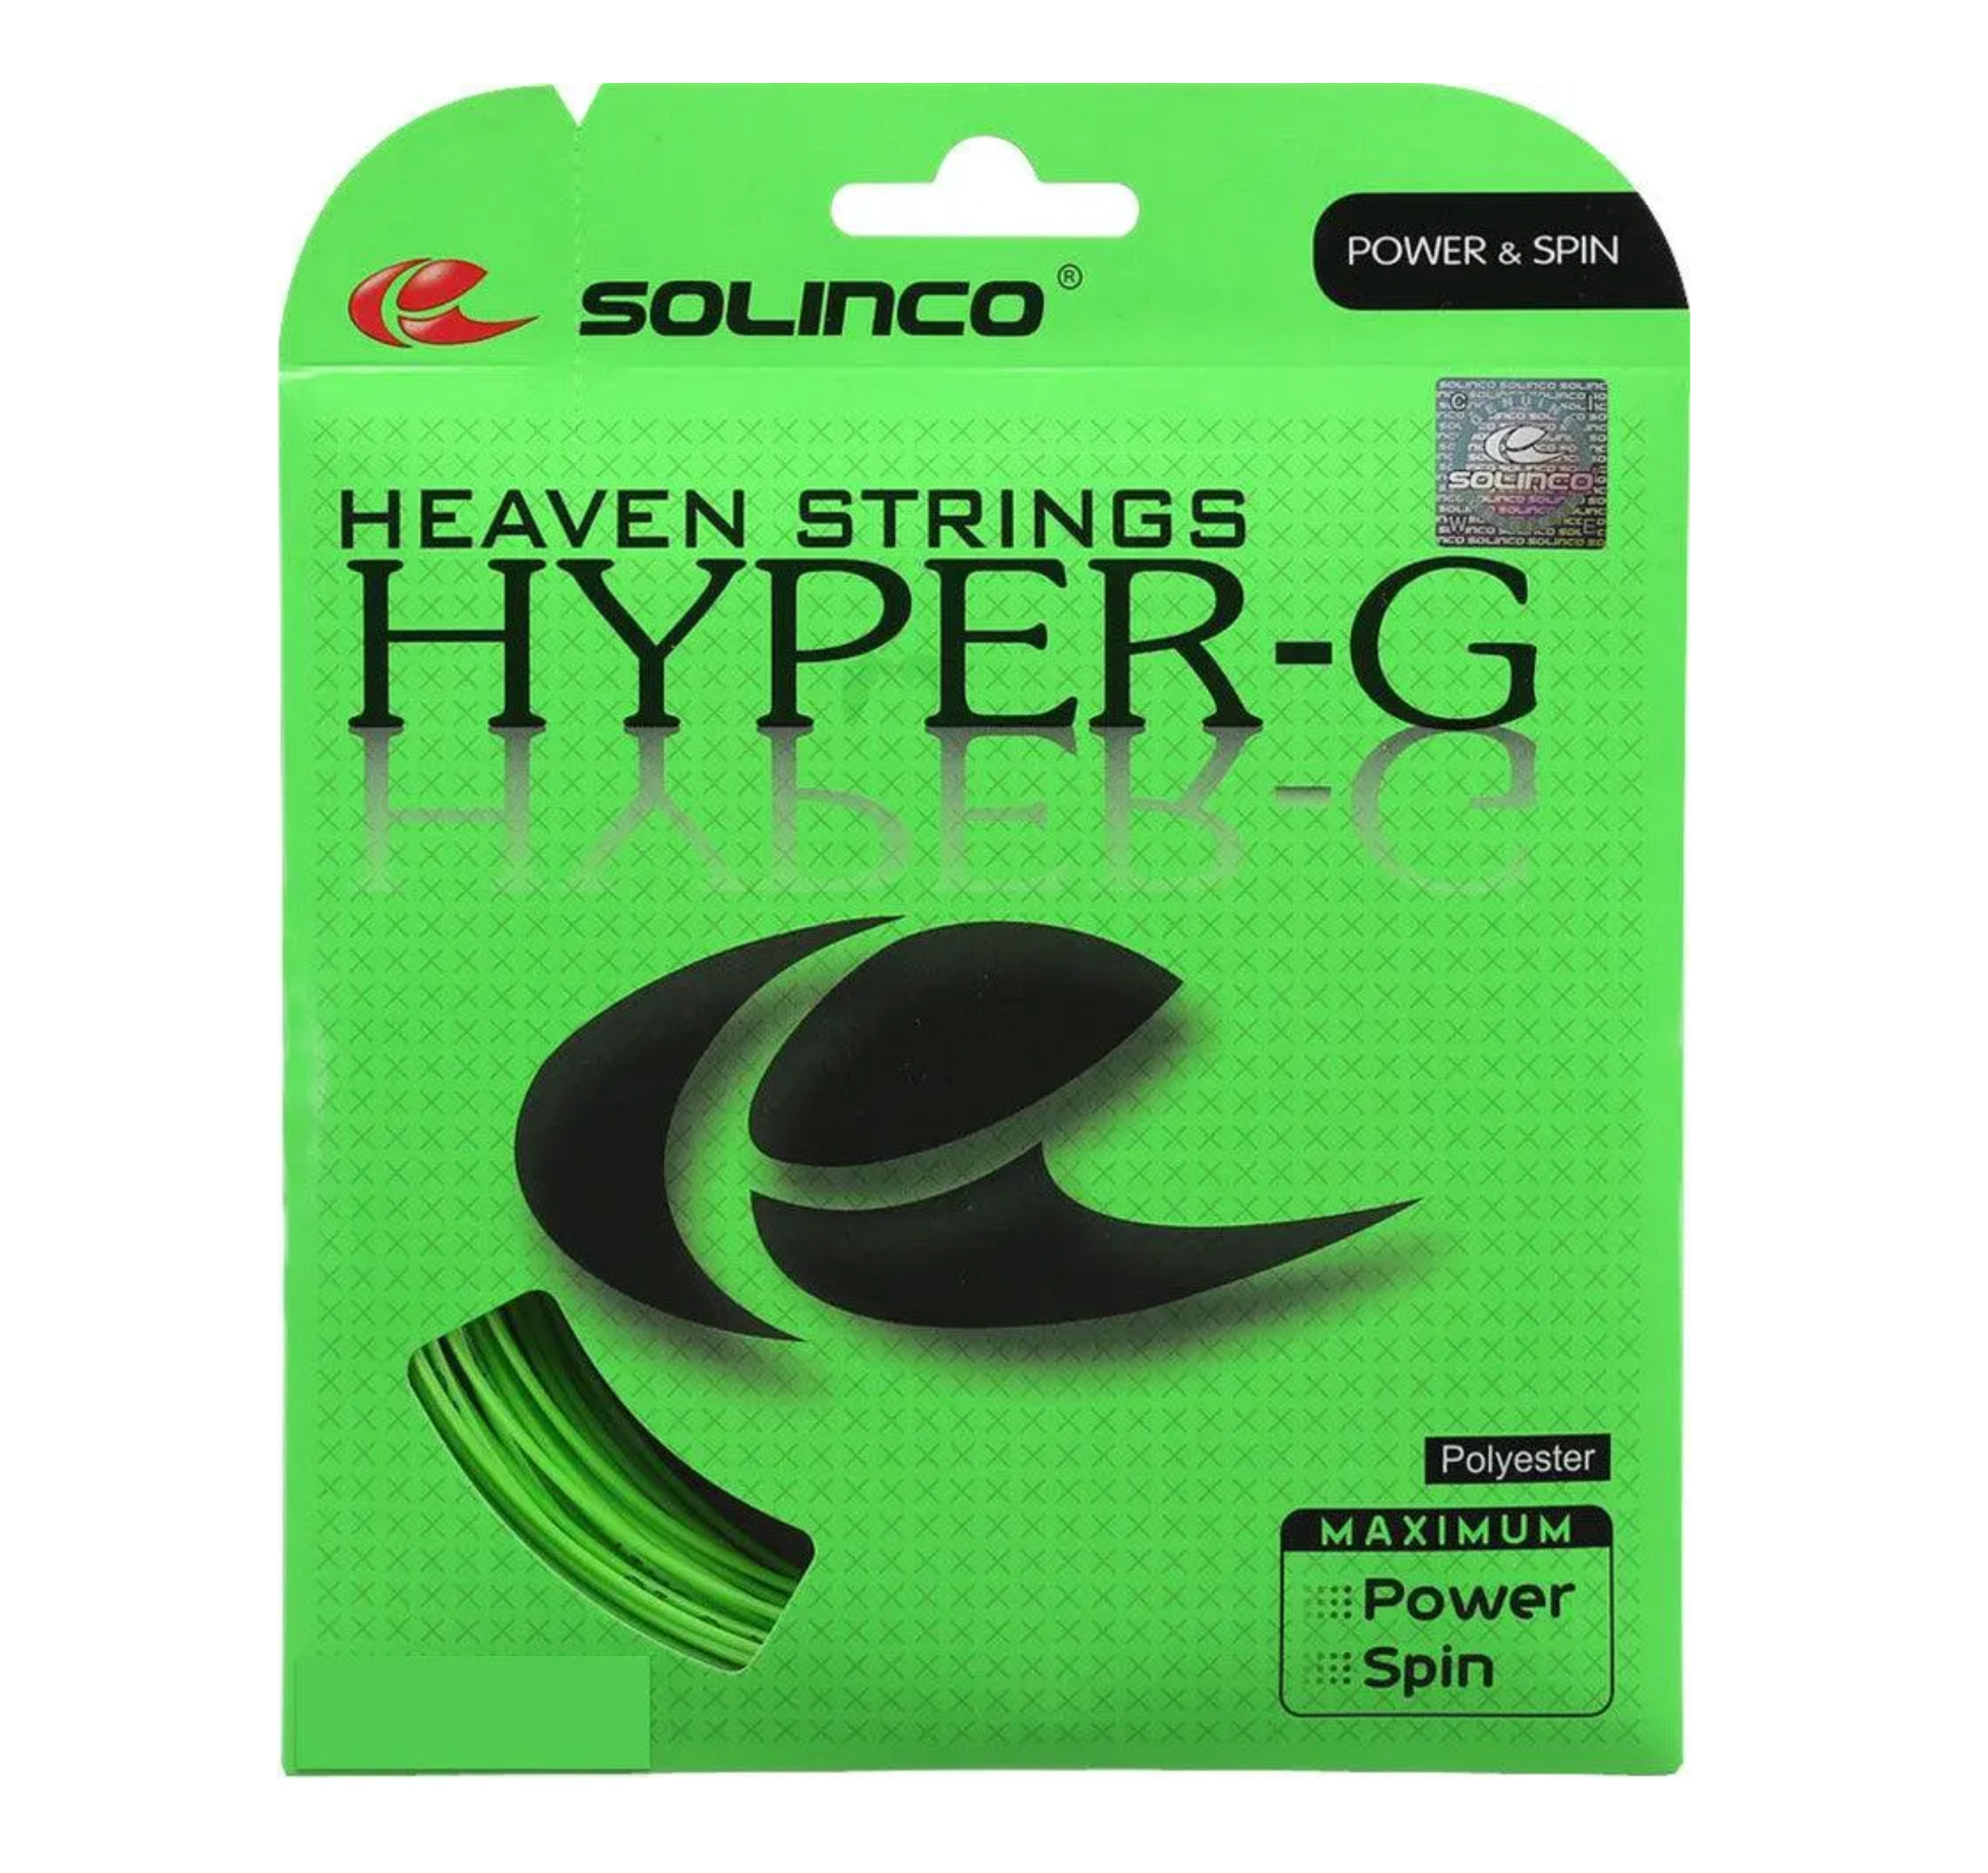 Detailed view of the Solinco Hyper-G 18 Tennis String